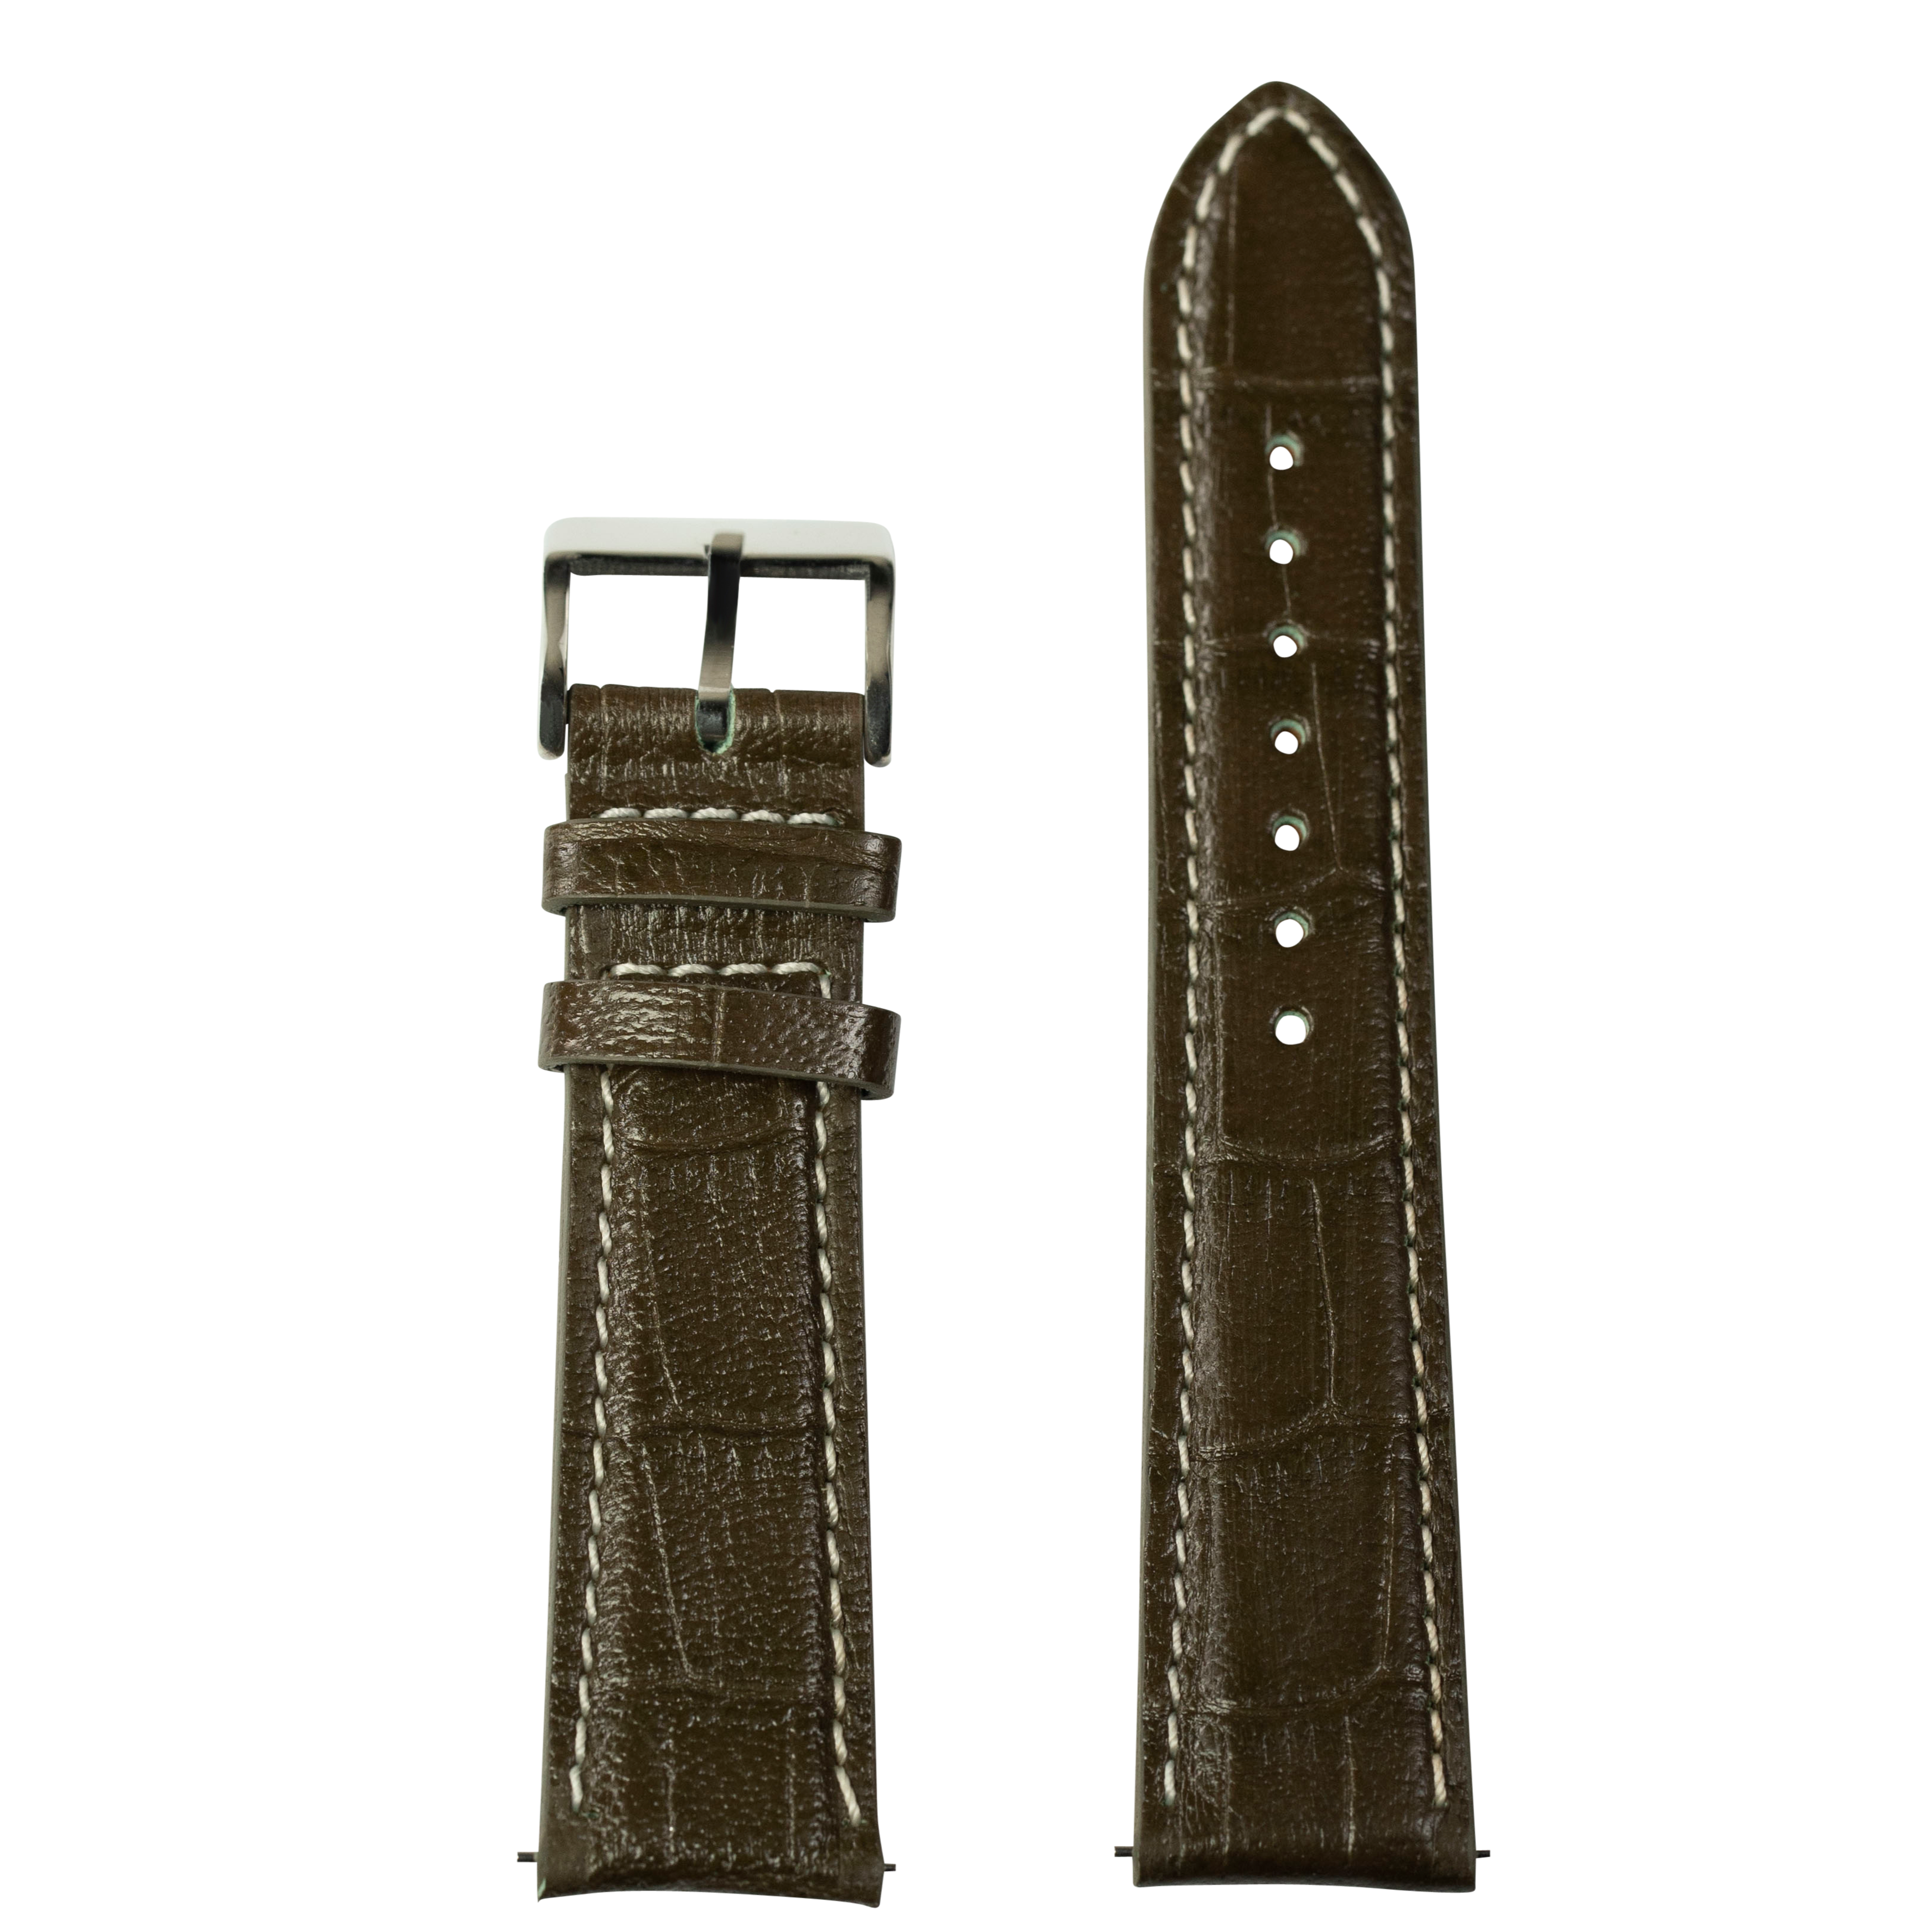 [Apple Watch] Alligator Leather - Olive Green | Contrast Stitching